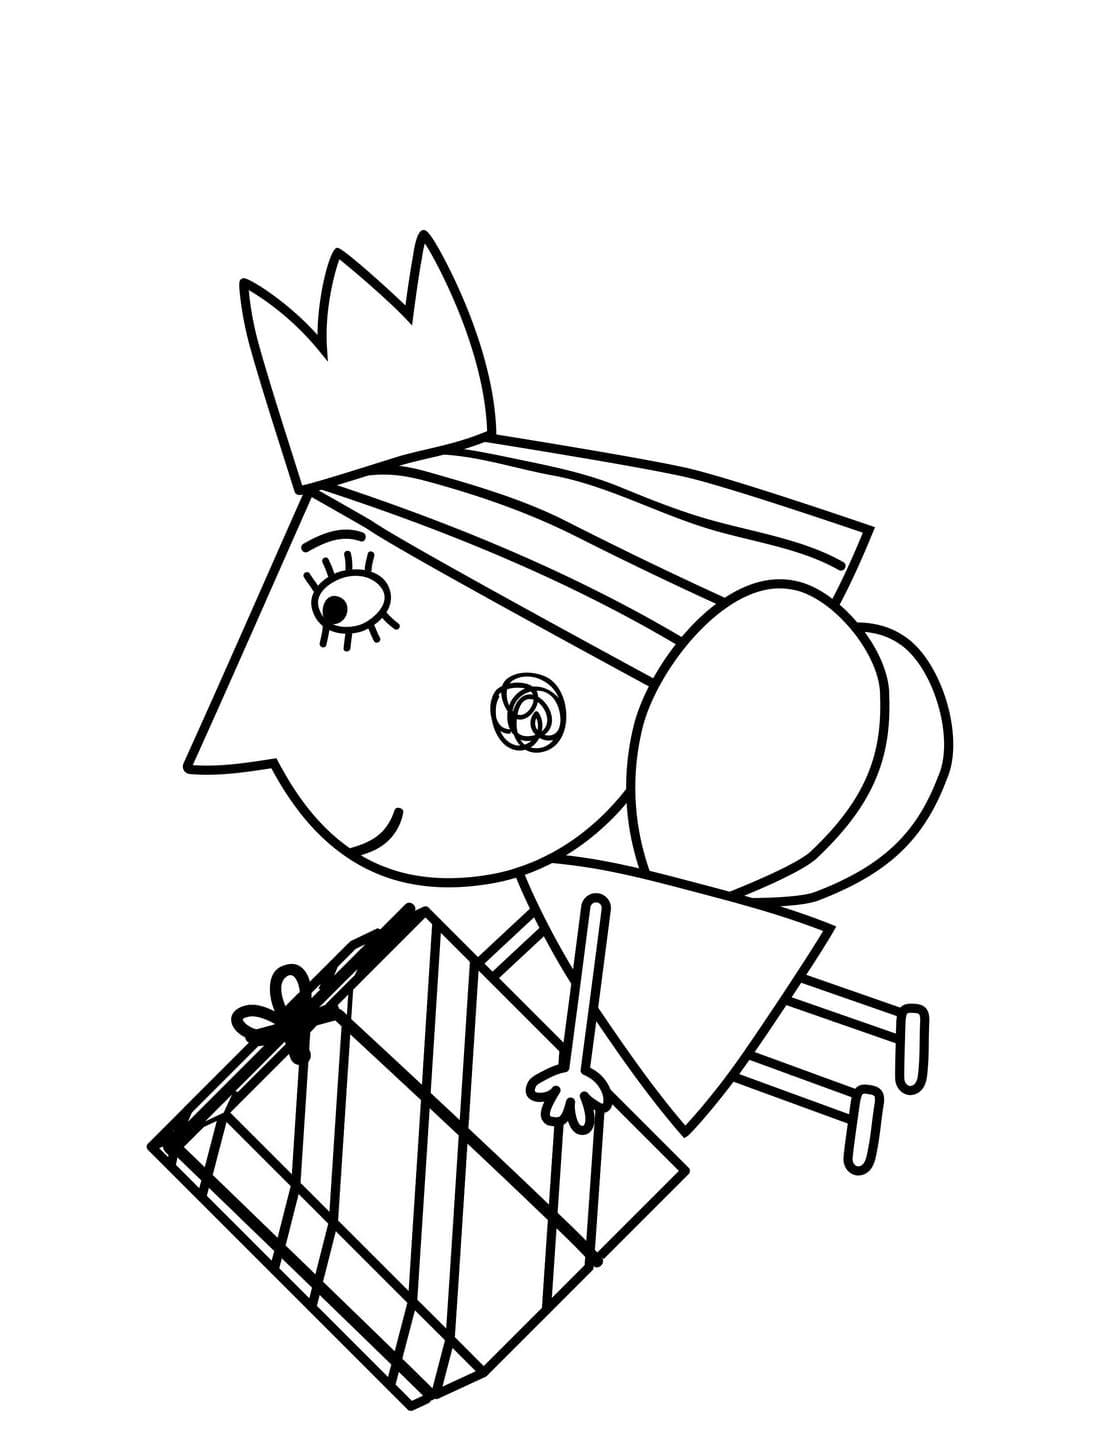 Coloring Page 1 Ben Amp Holly - Riset